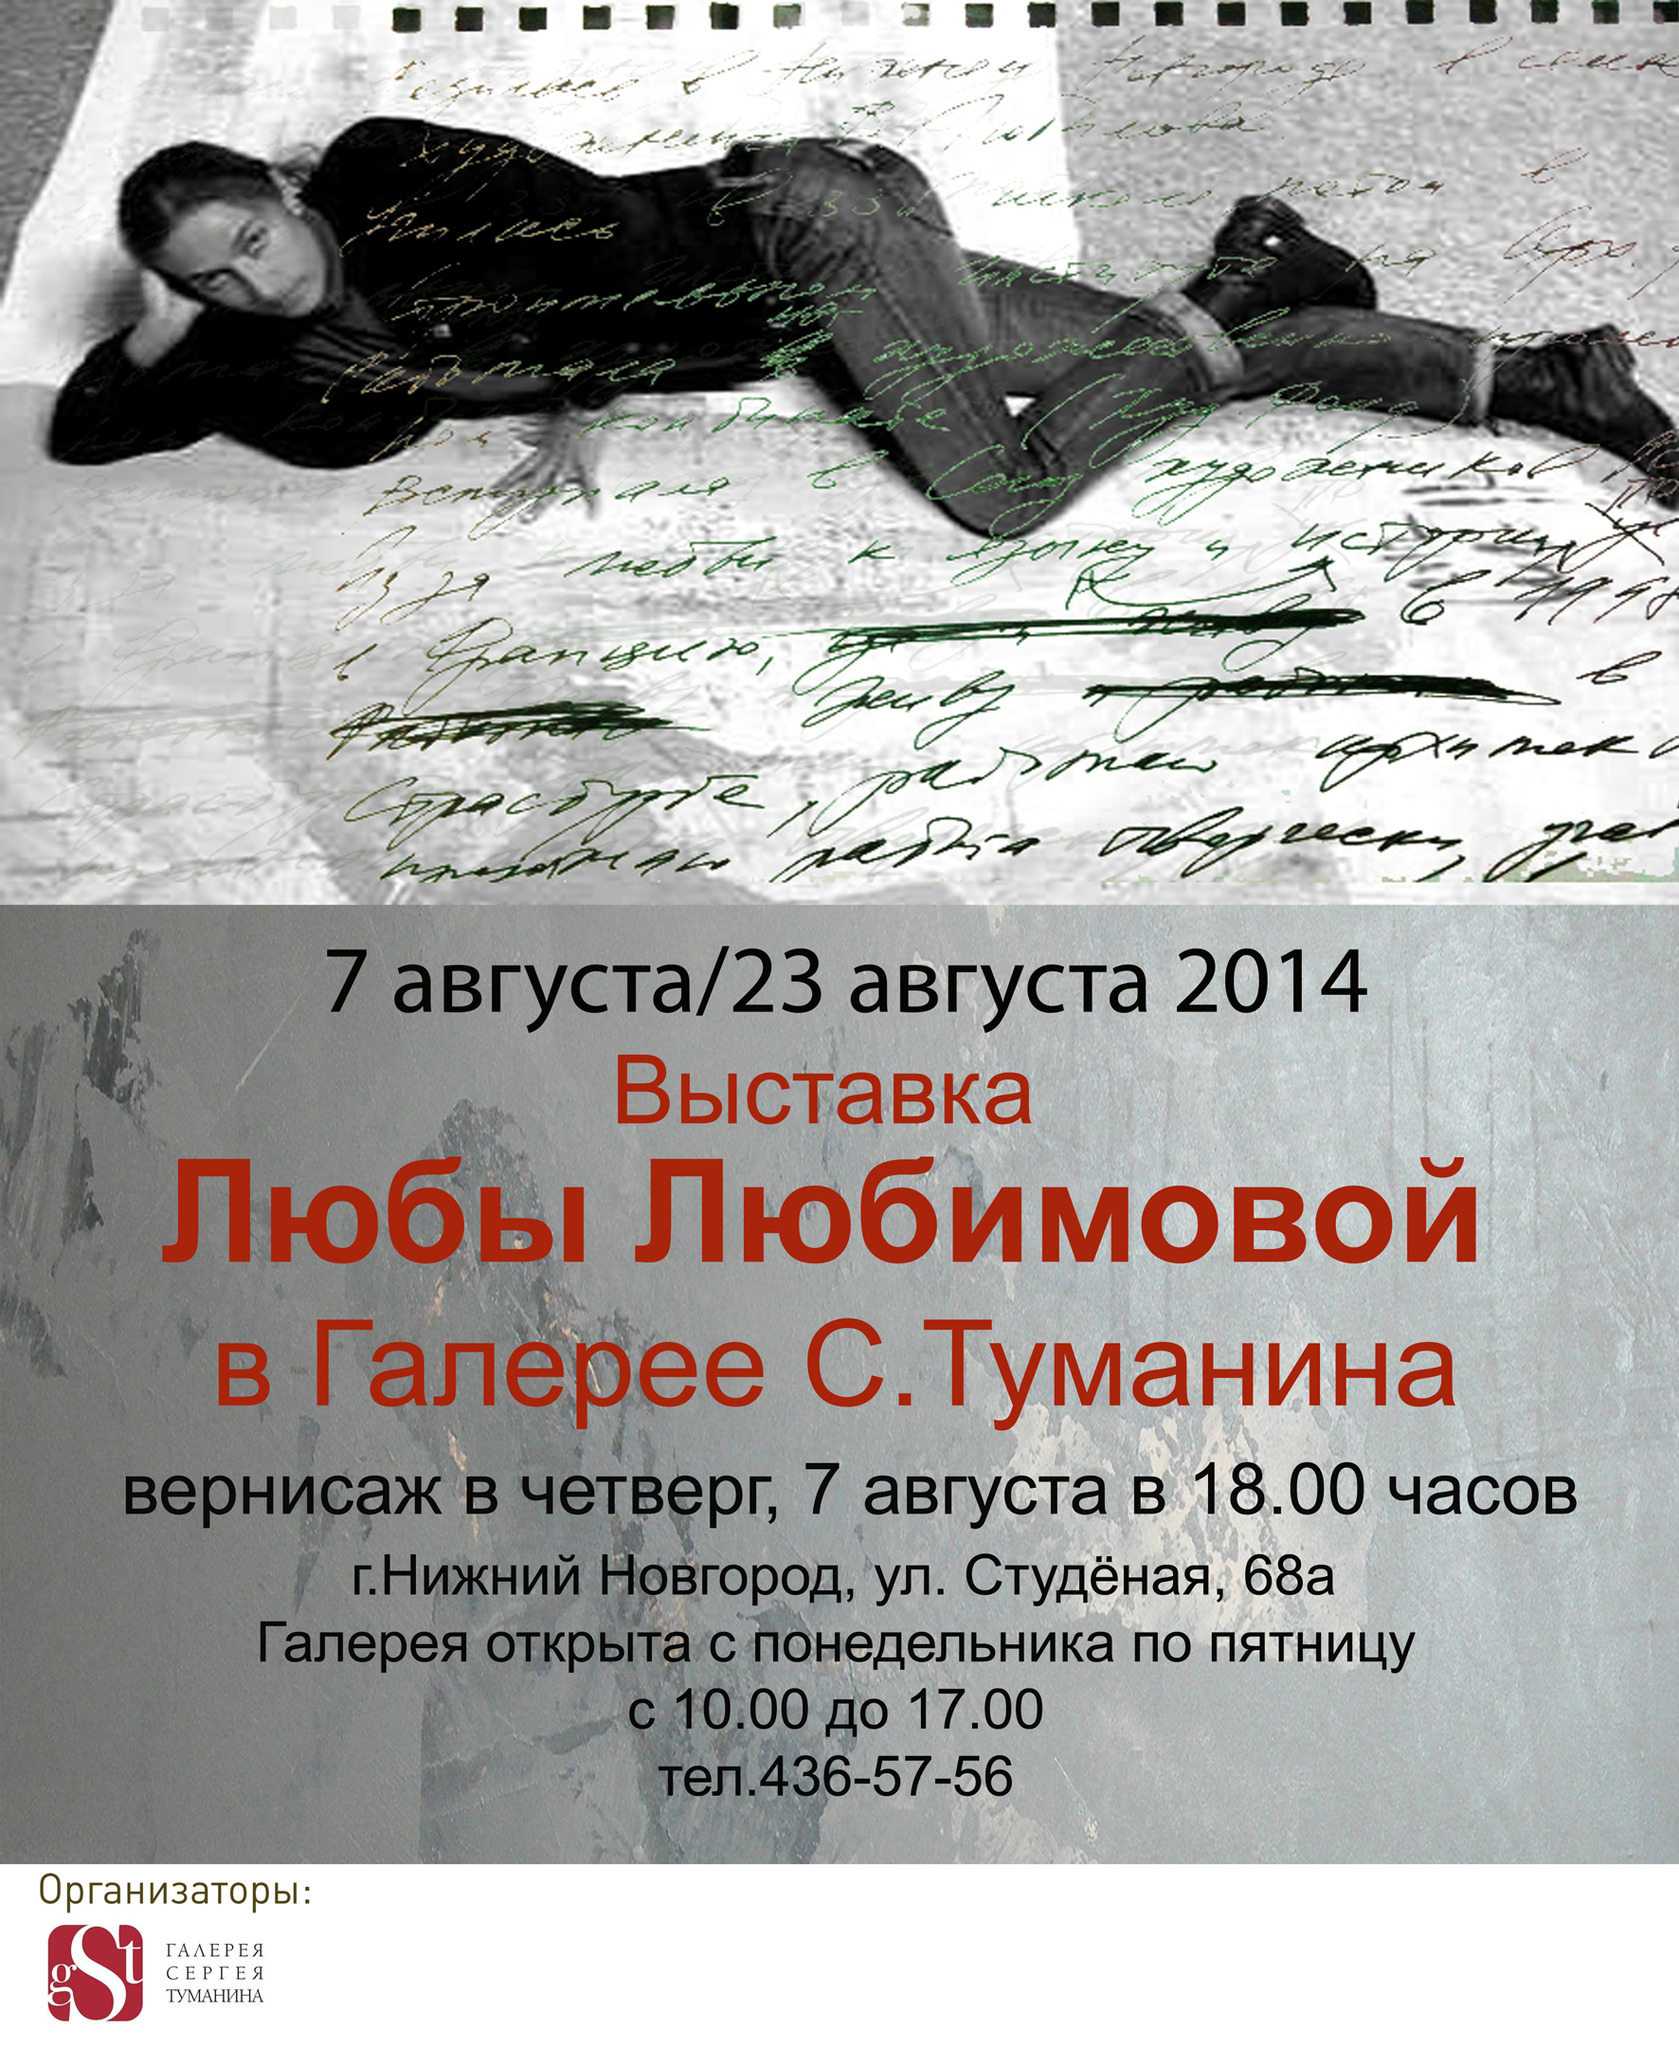 Exhibition of works by Luba Lyubimov. larger formats